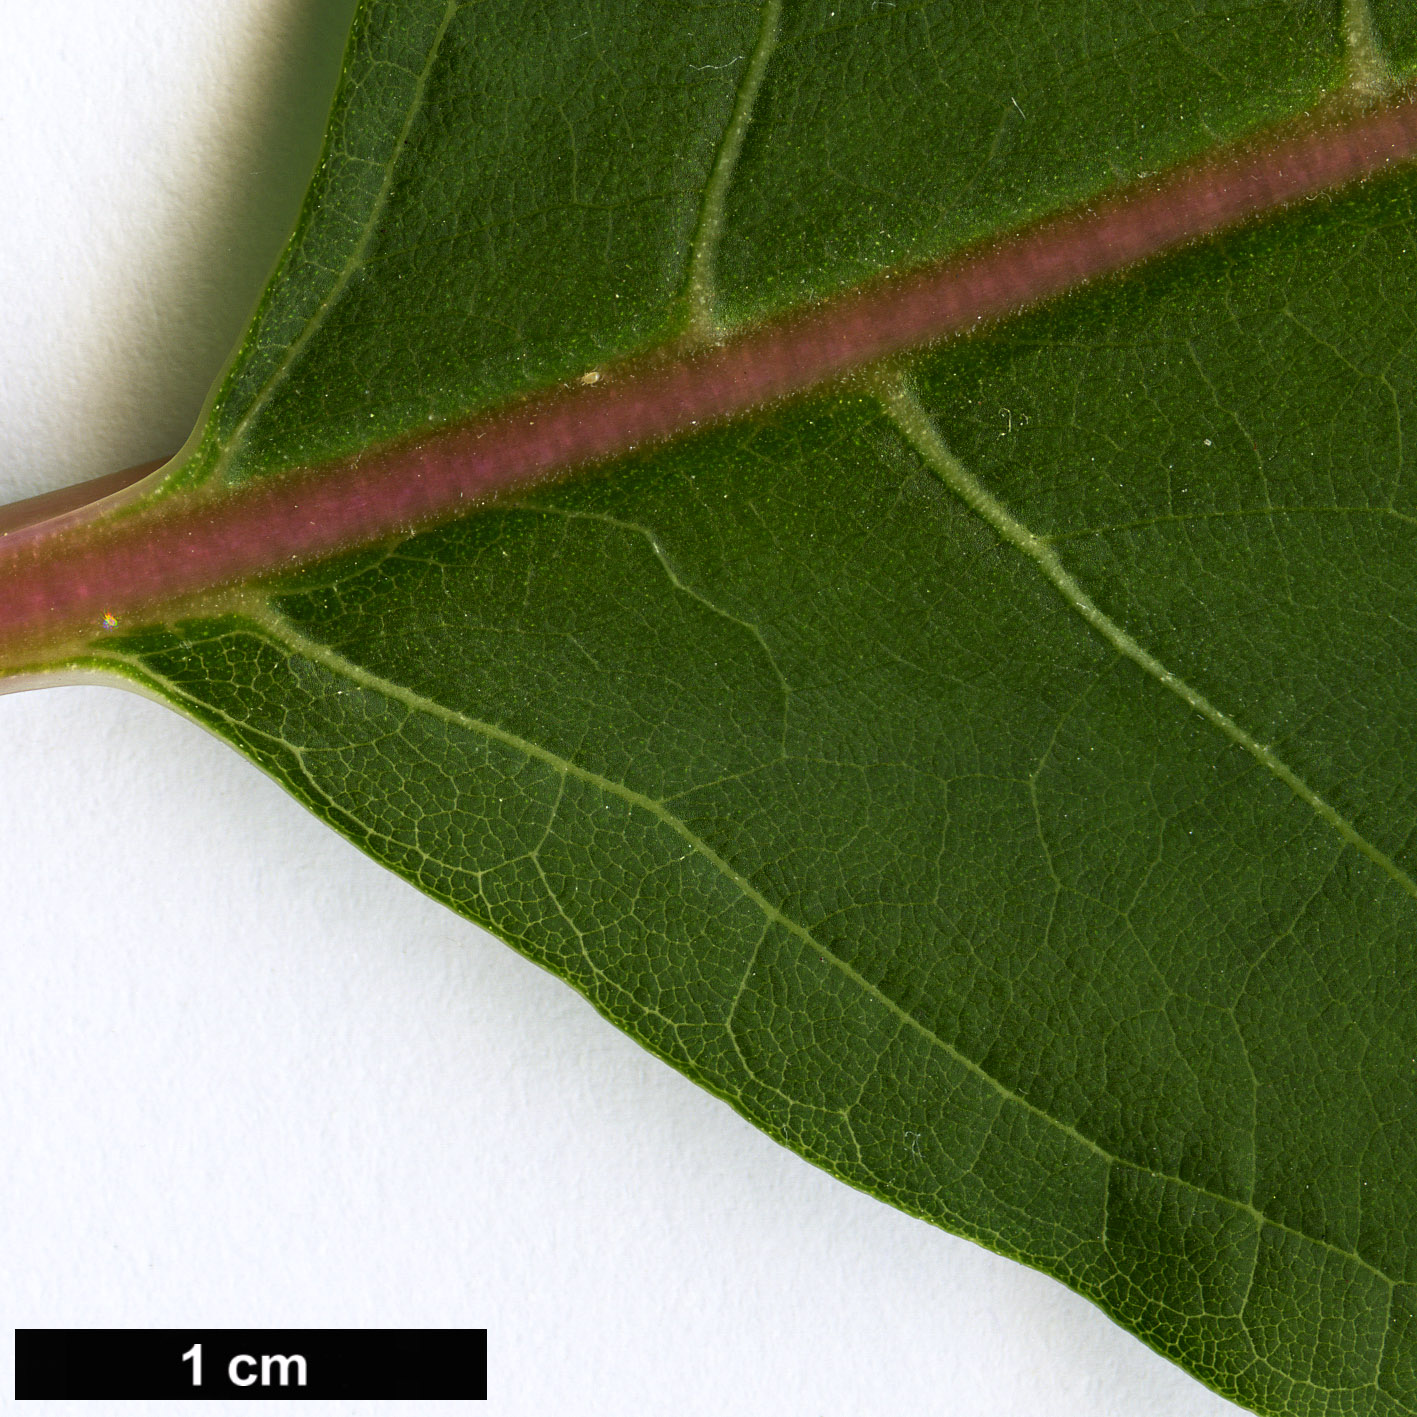 High resolution image: Family: Solanaceae - Genus: Phytolacca - Taxon: dioica